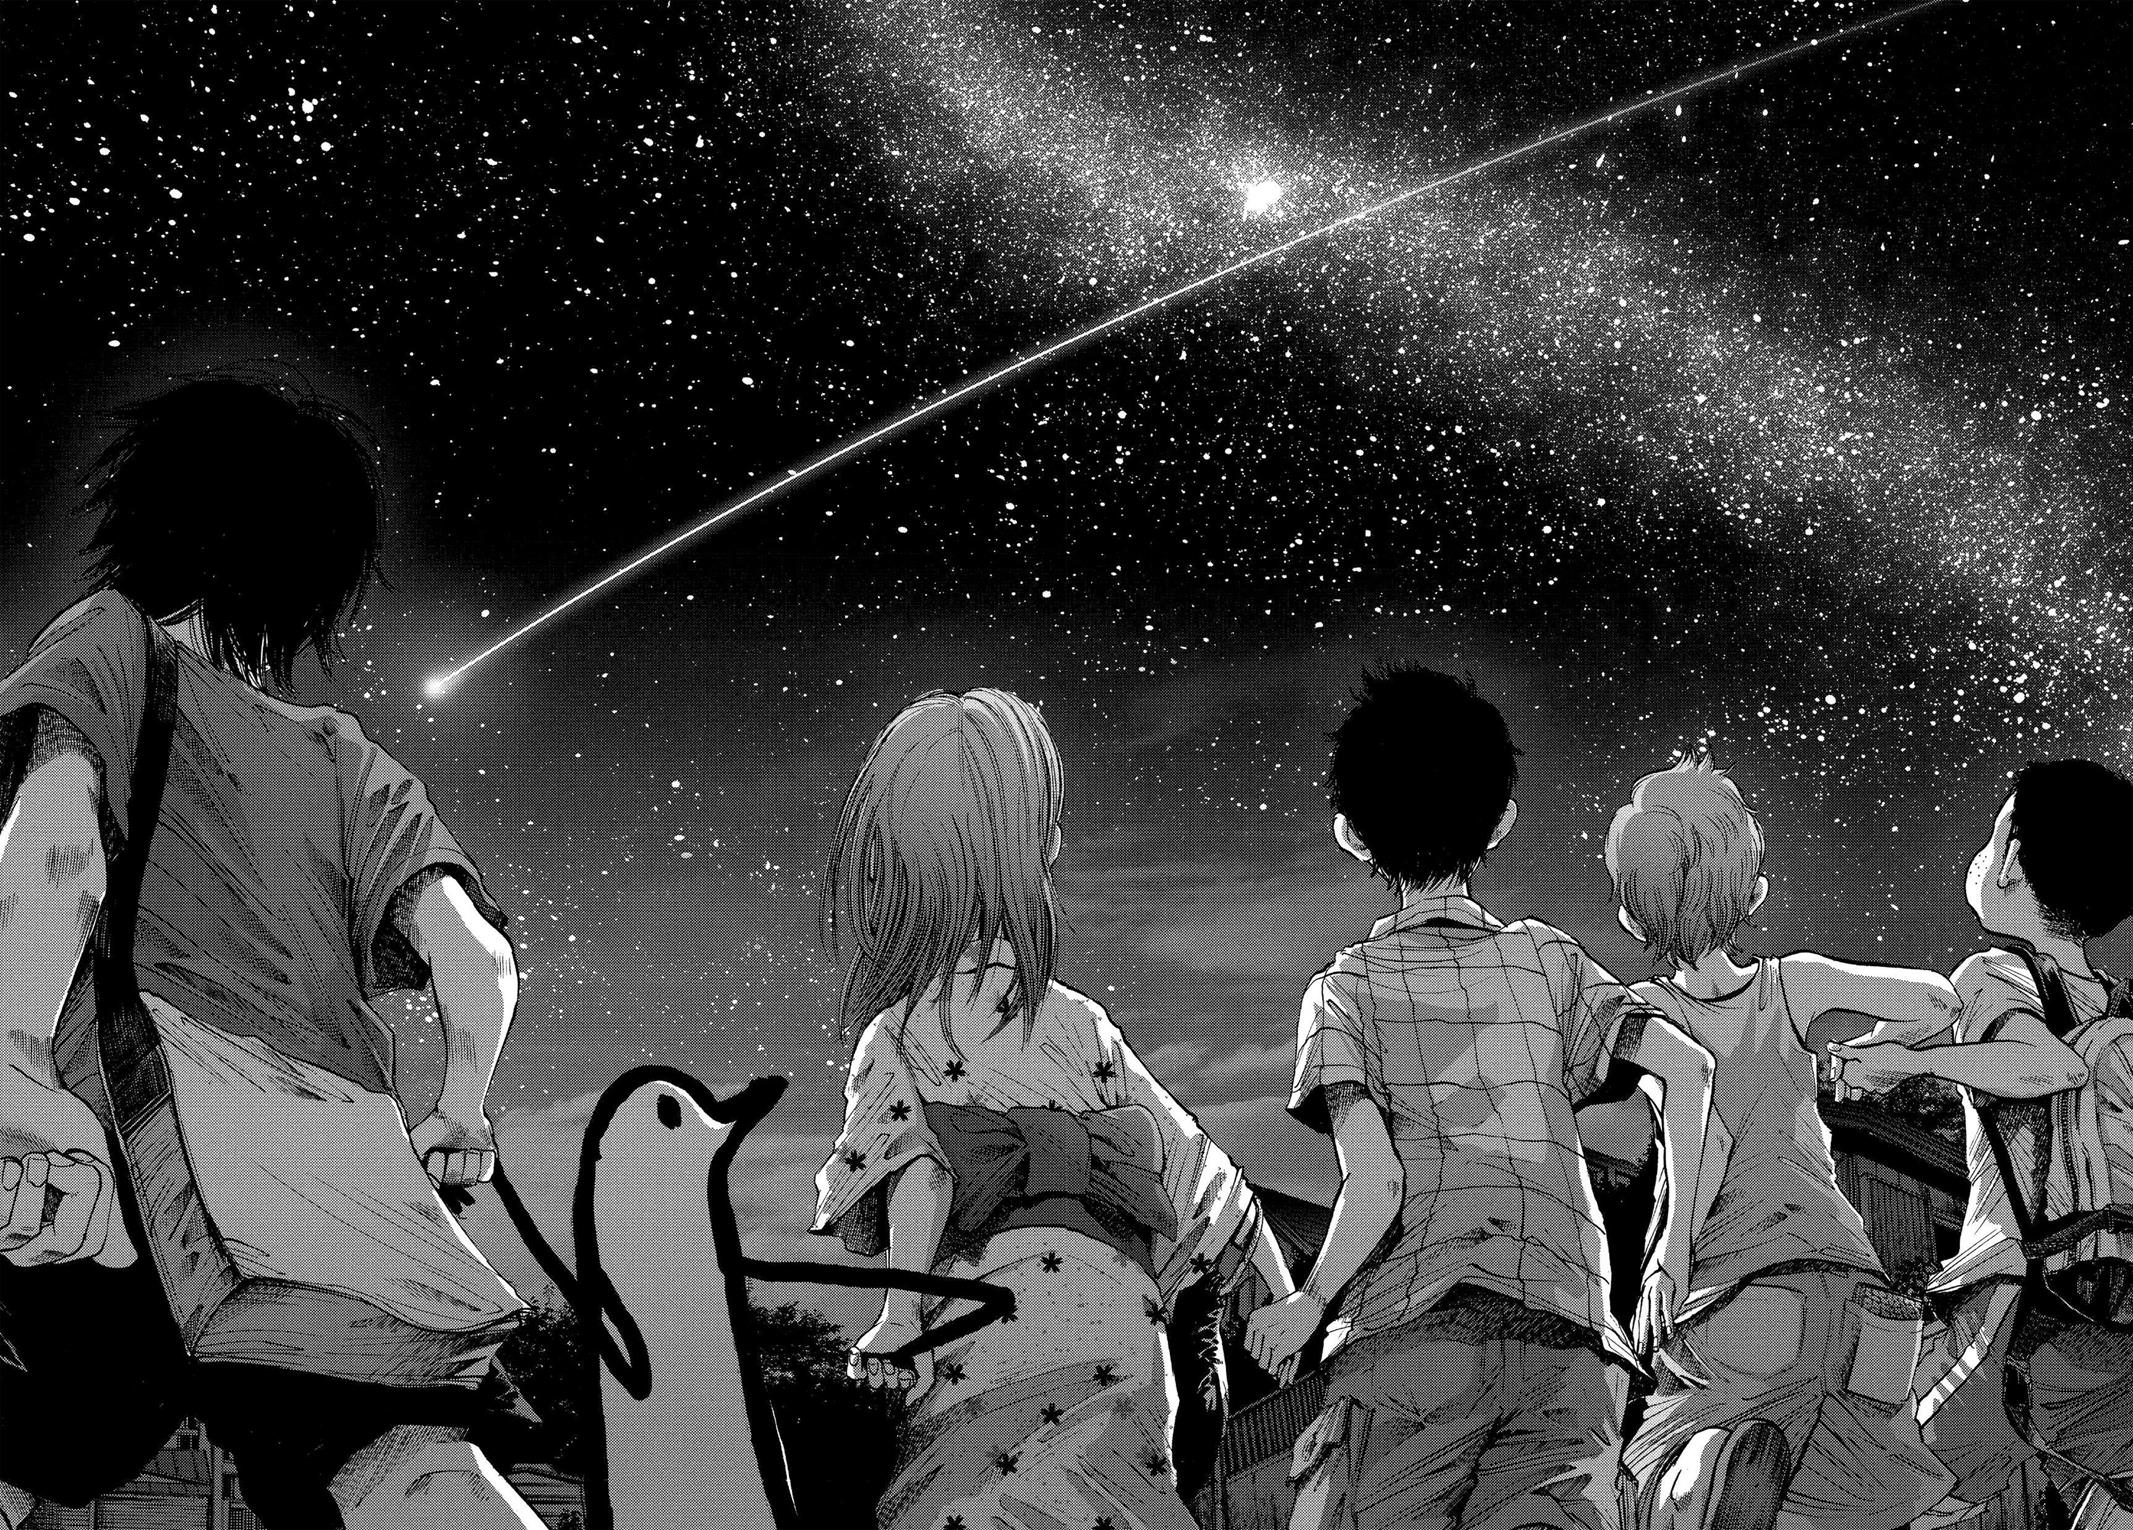 Punpun and her friends gazing at the stars in the sky, the stars that represent endless opportunities from OYASUMI PUNPUN